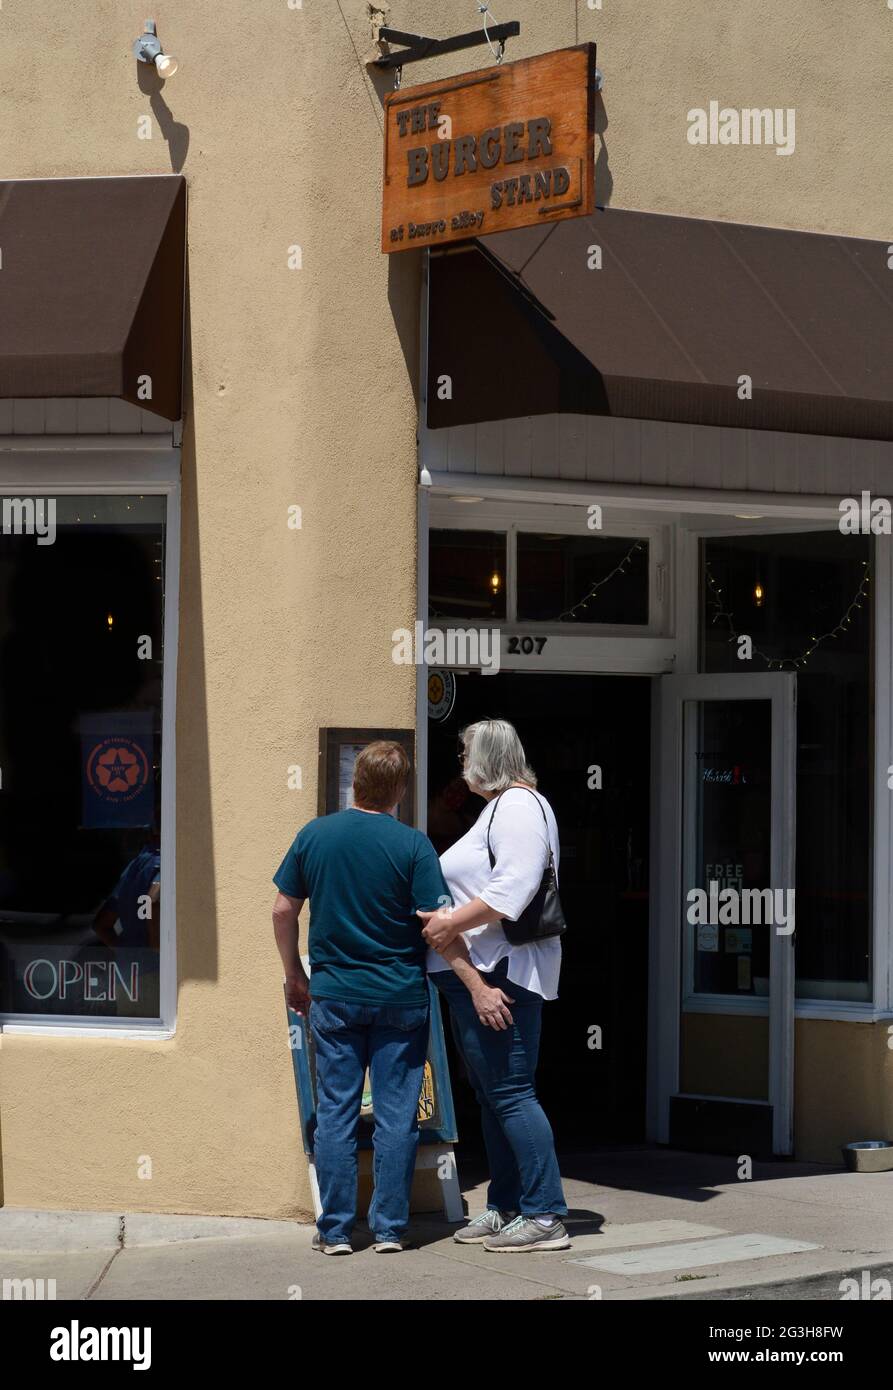 A couple study a menu posted outside a restaurant in Santa Fe, New Mexico. Stock Photo